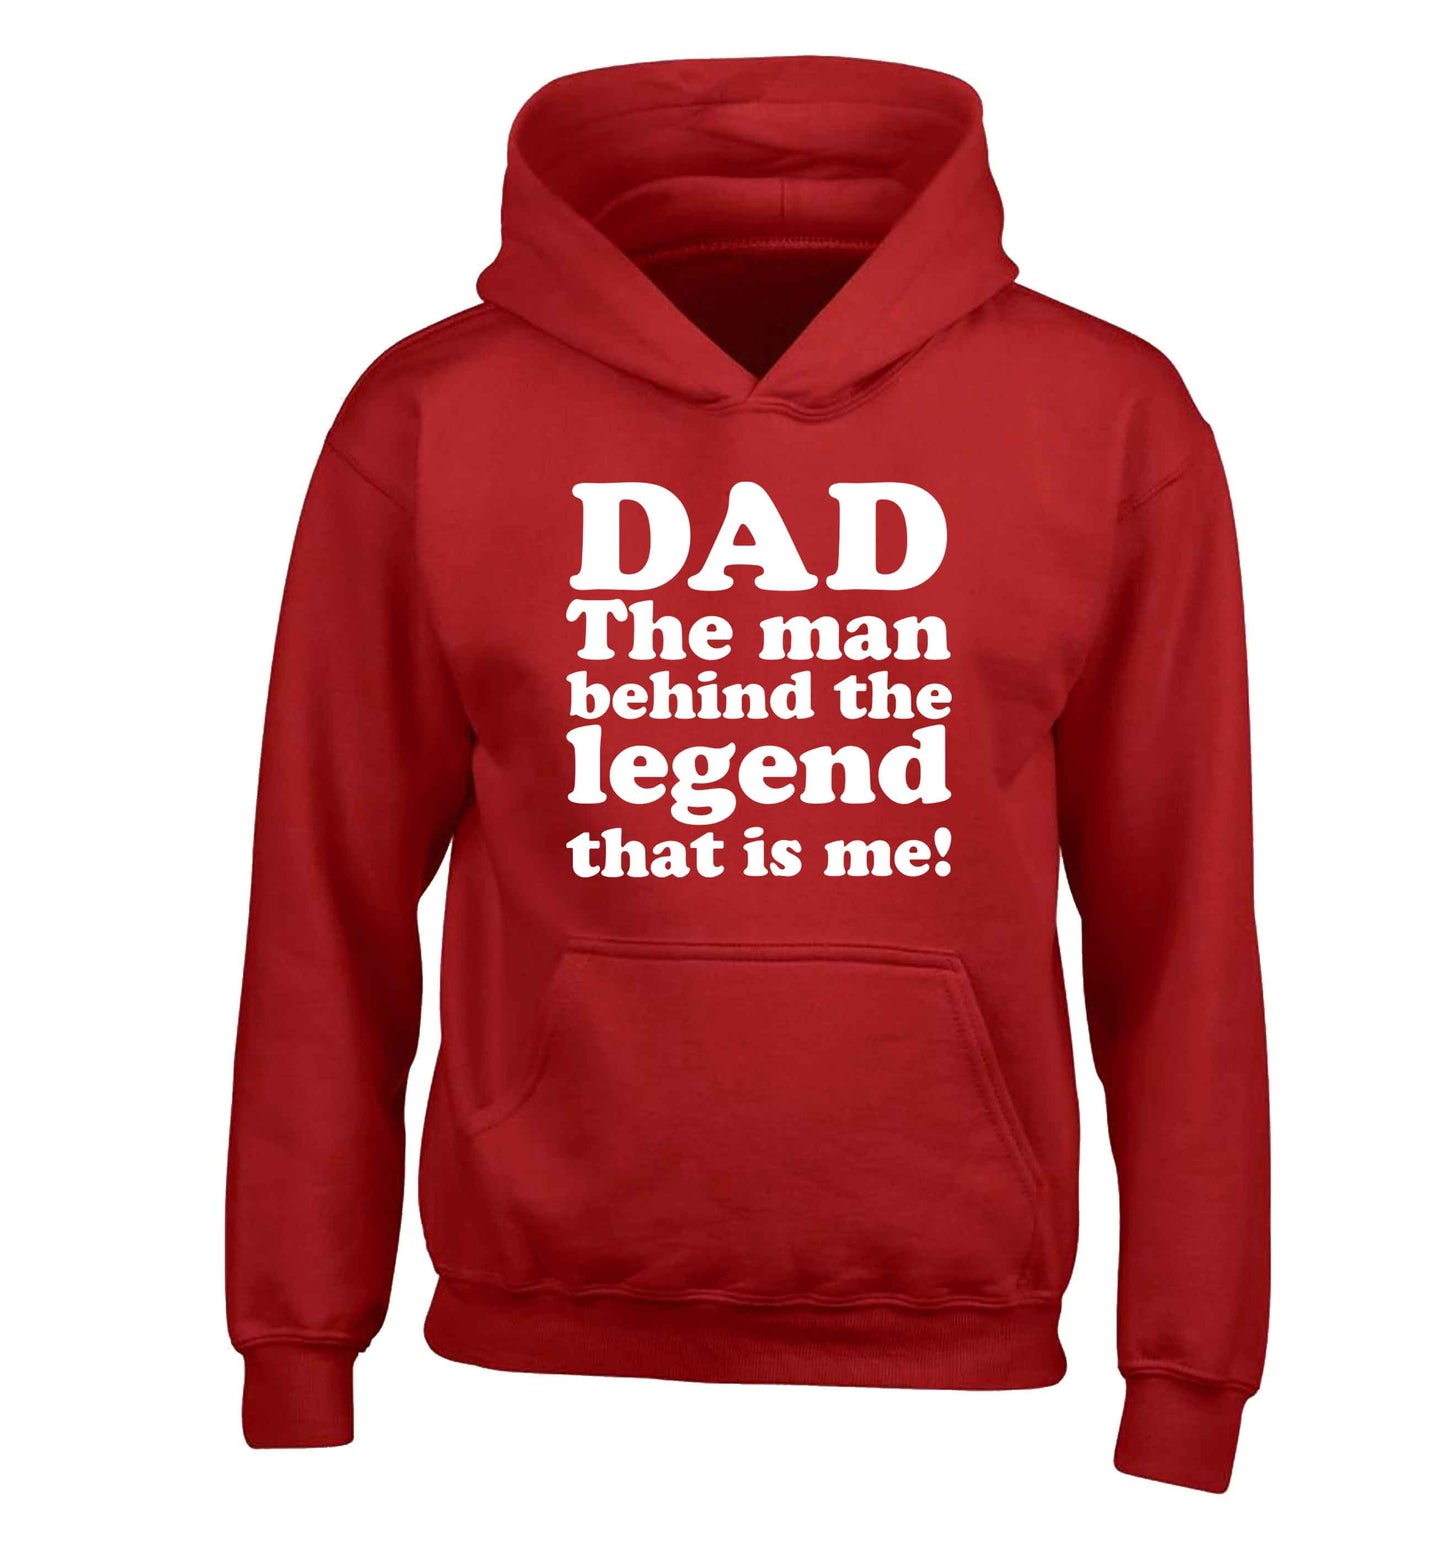 Dad the man behind the legend that is me children's red hoodie 12-13 Years